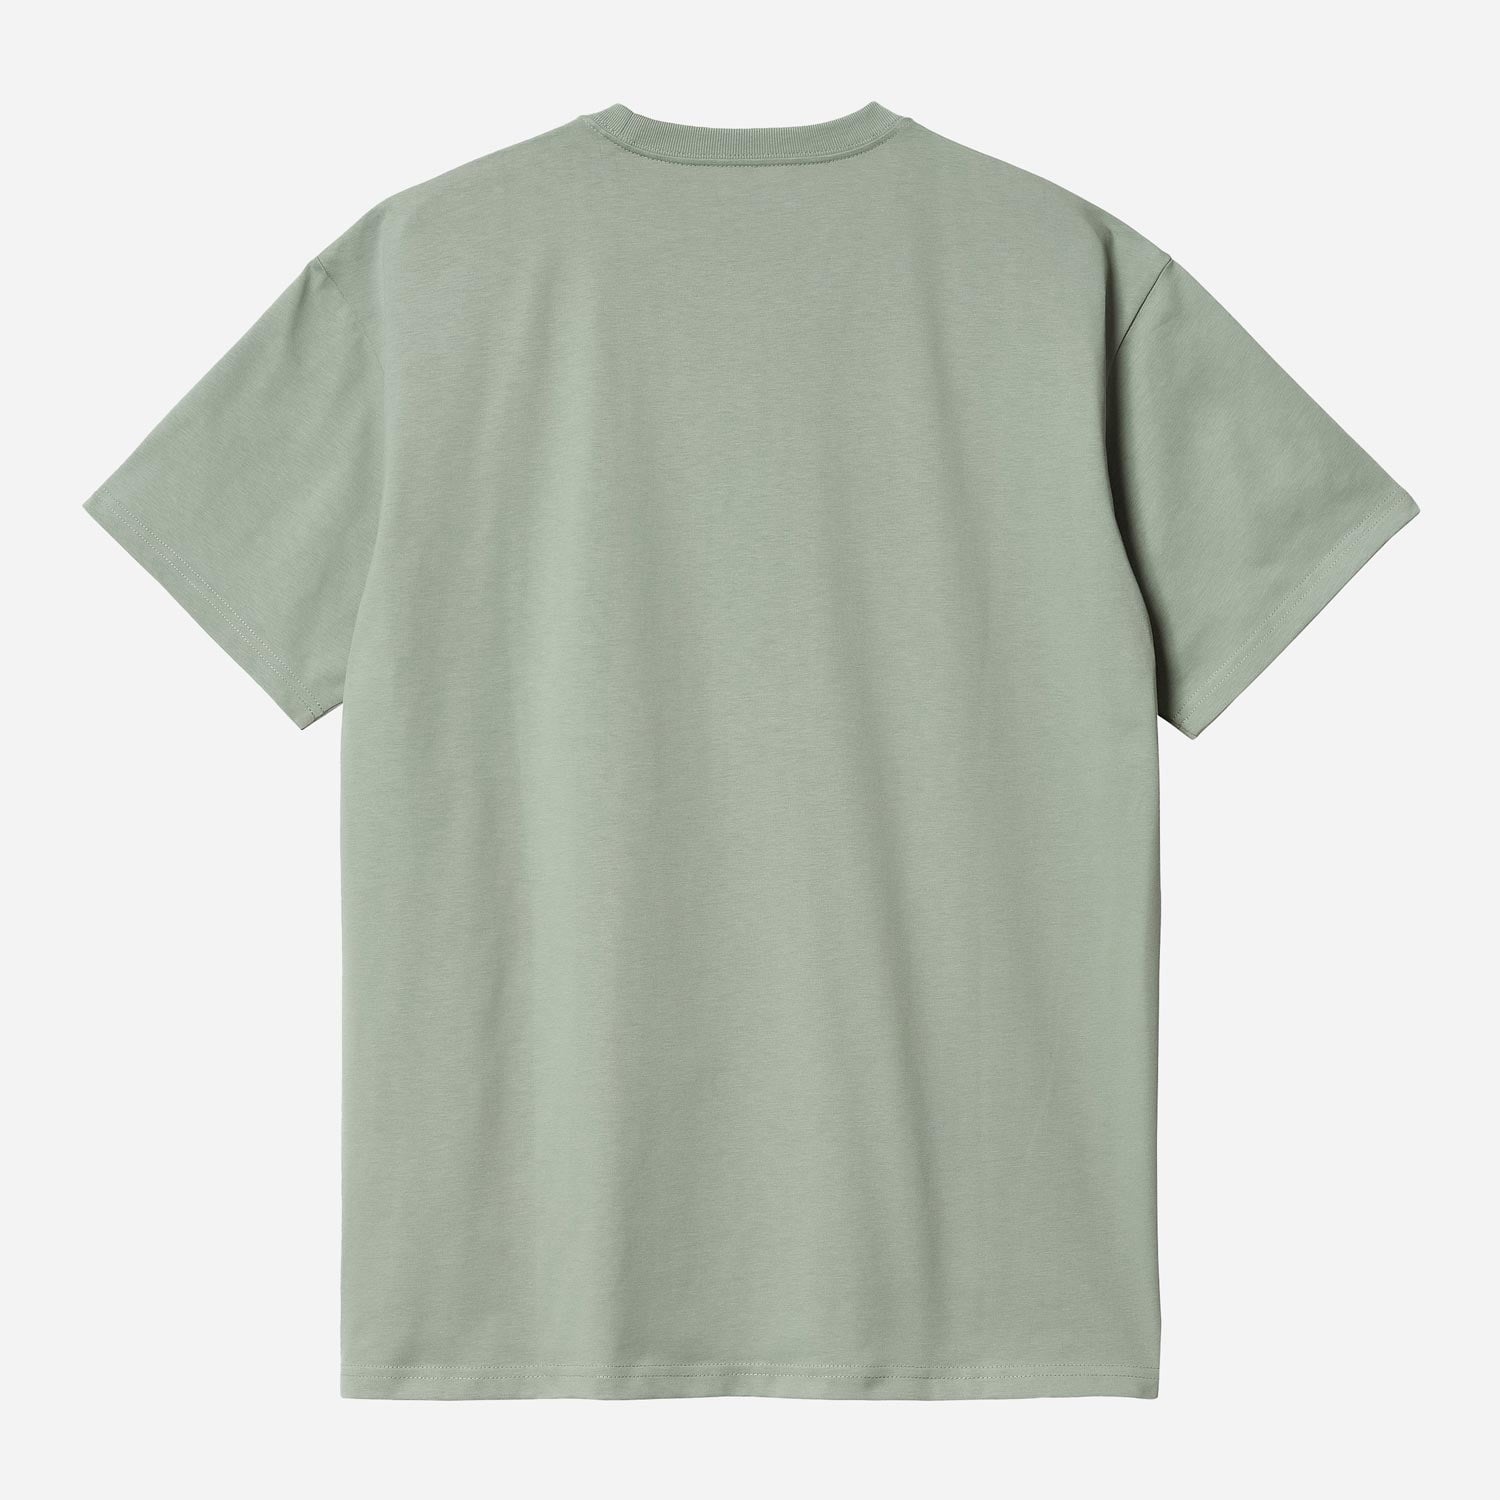 Carhartt WIP Chase Loose Fit Tee - Glassy Teal/Gold